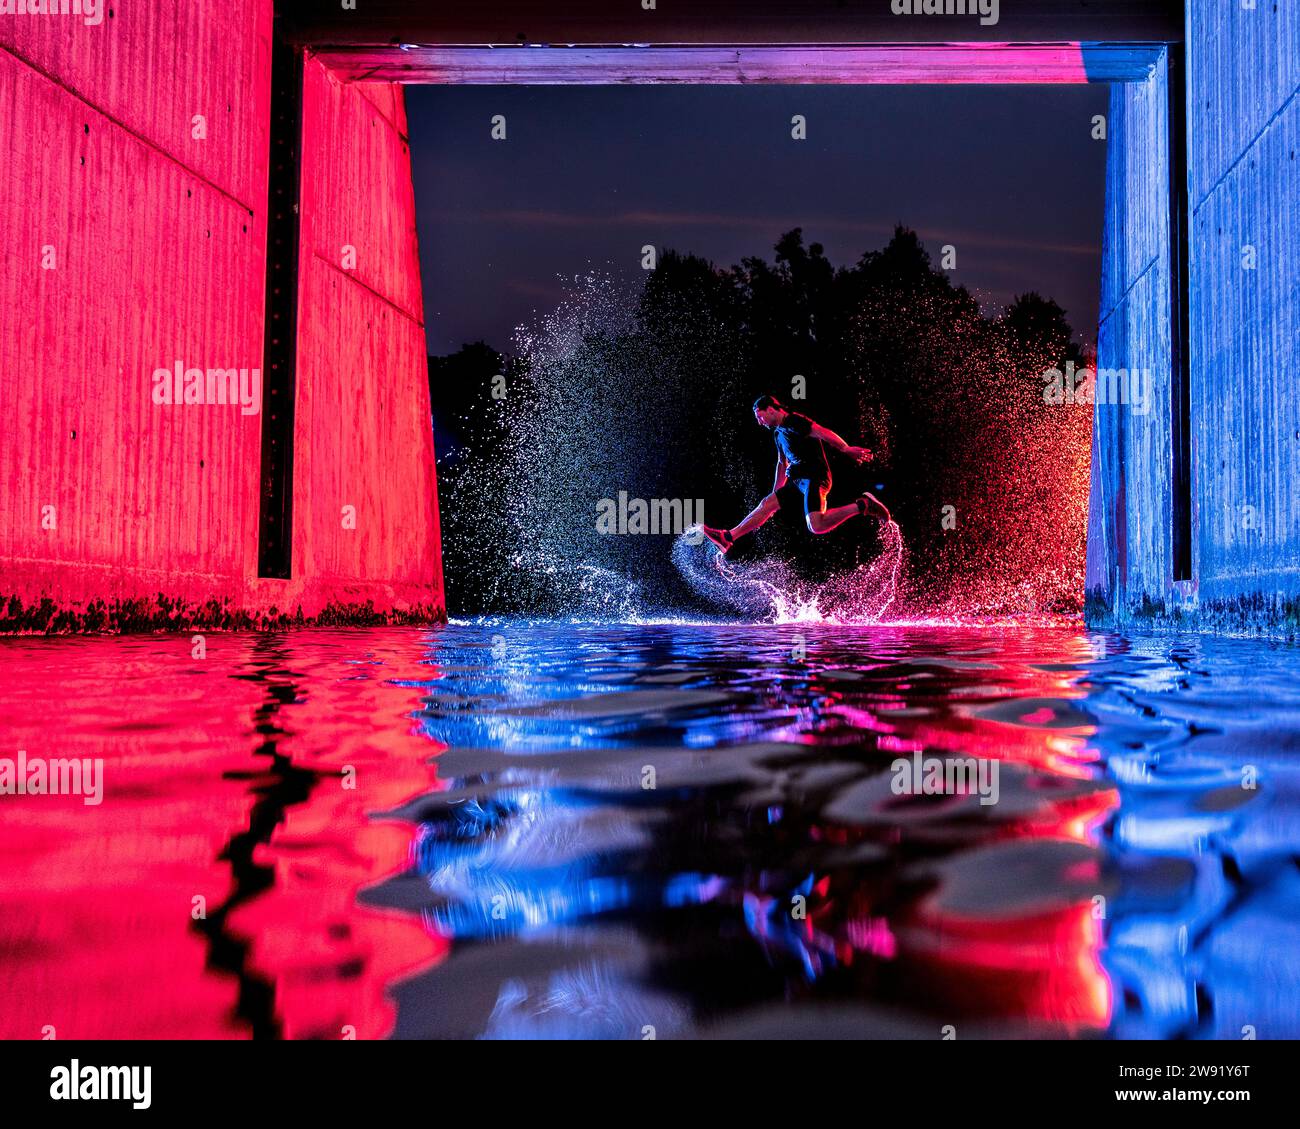 Man jumping in river water under bridge with neon lights at night Stock Photo